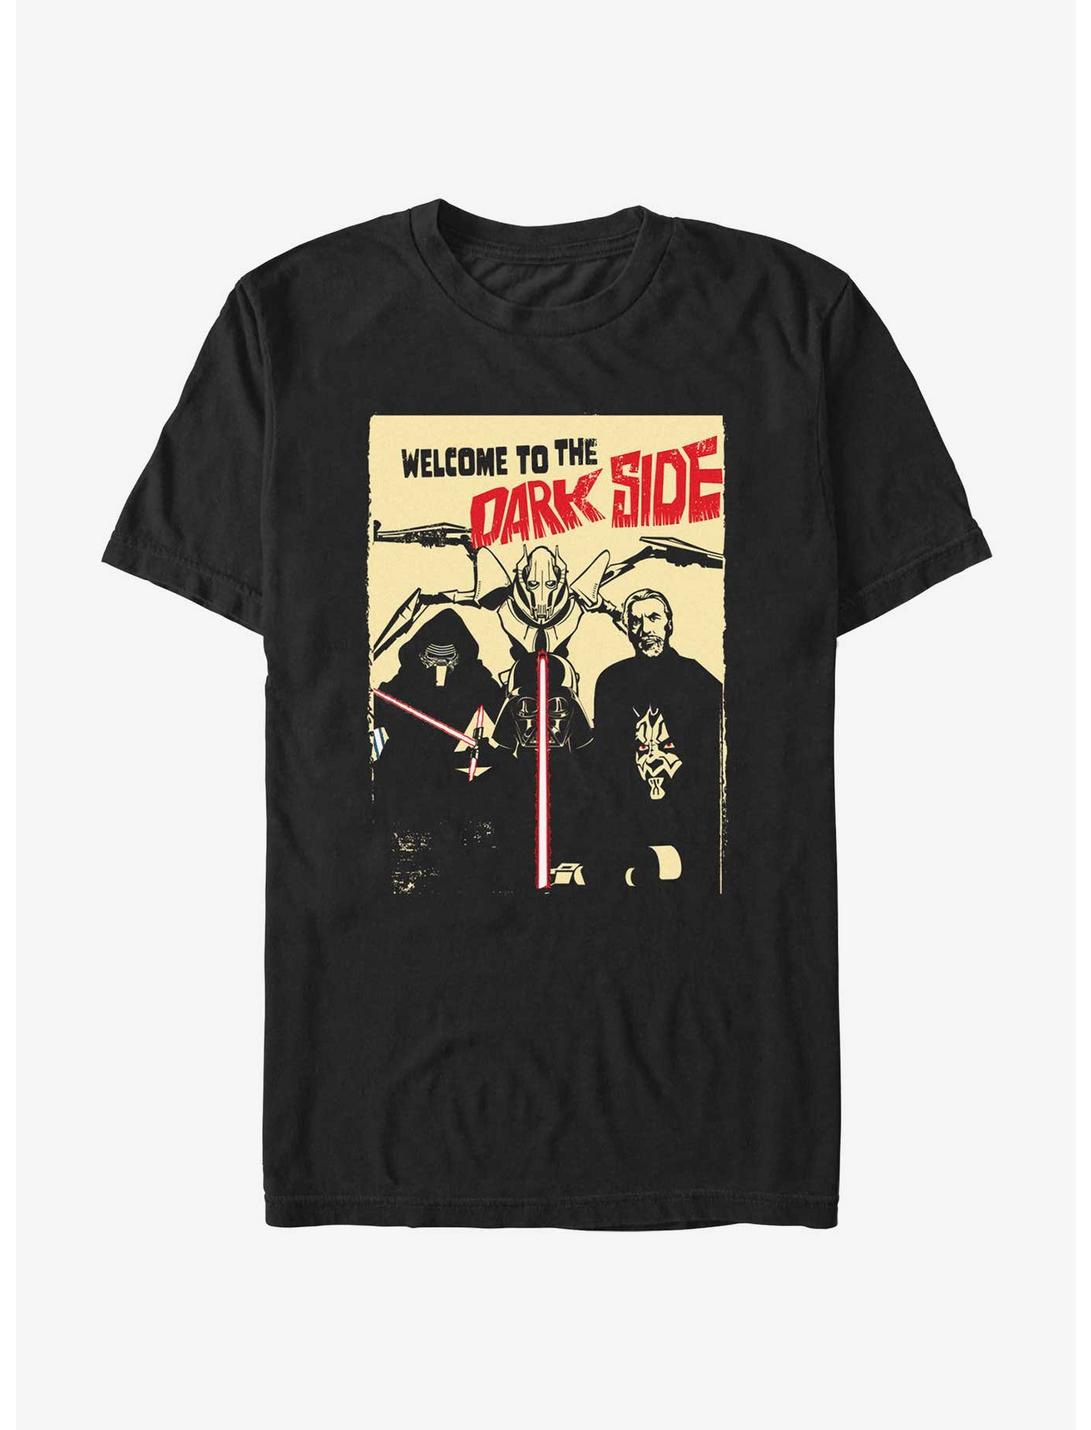 Star Wars Welcome To The Dark Side Retro Poster T-Shirt, BLACK, hi-res